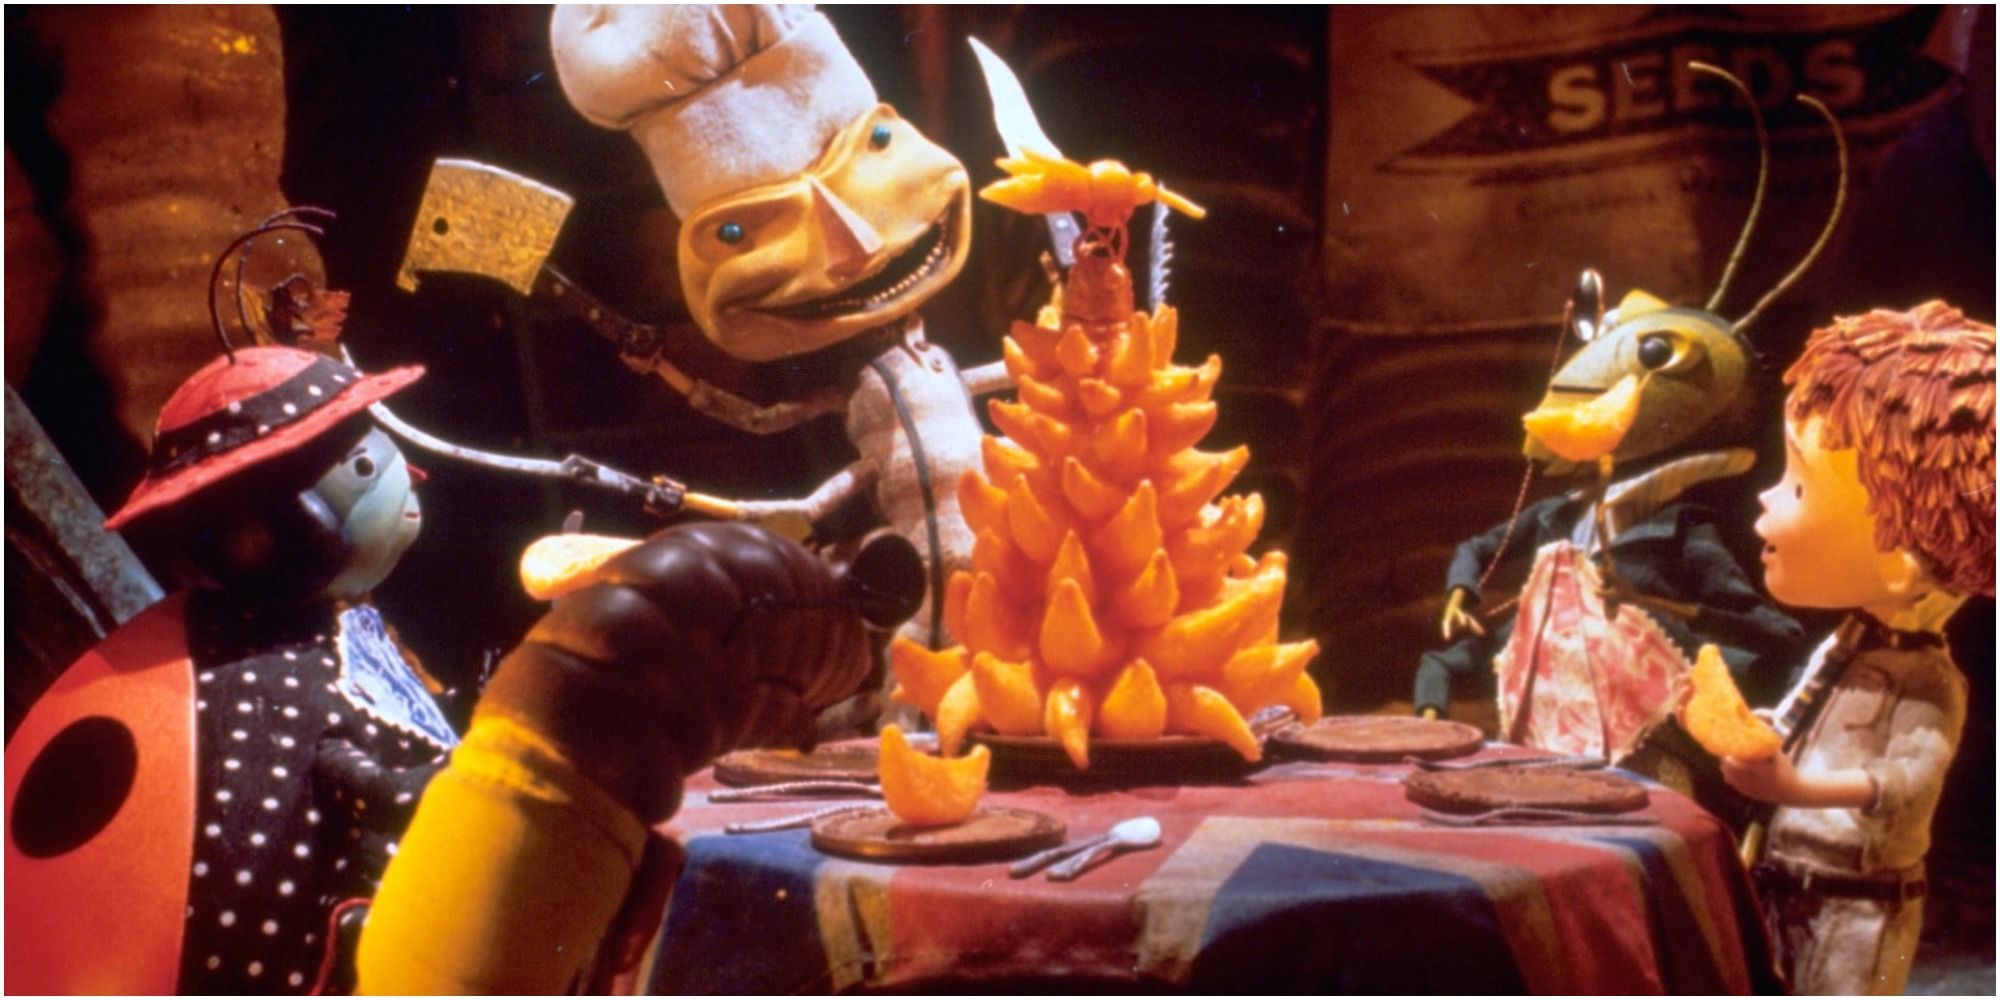 10 Best Stop Motion Movies Of All Time According To Rotten Tomatoes